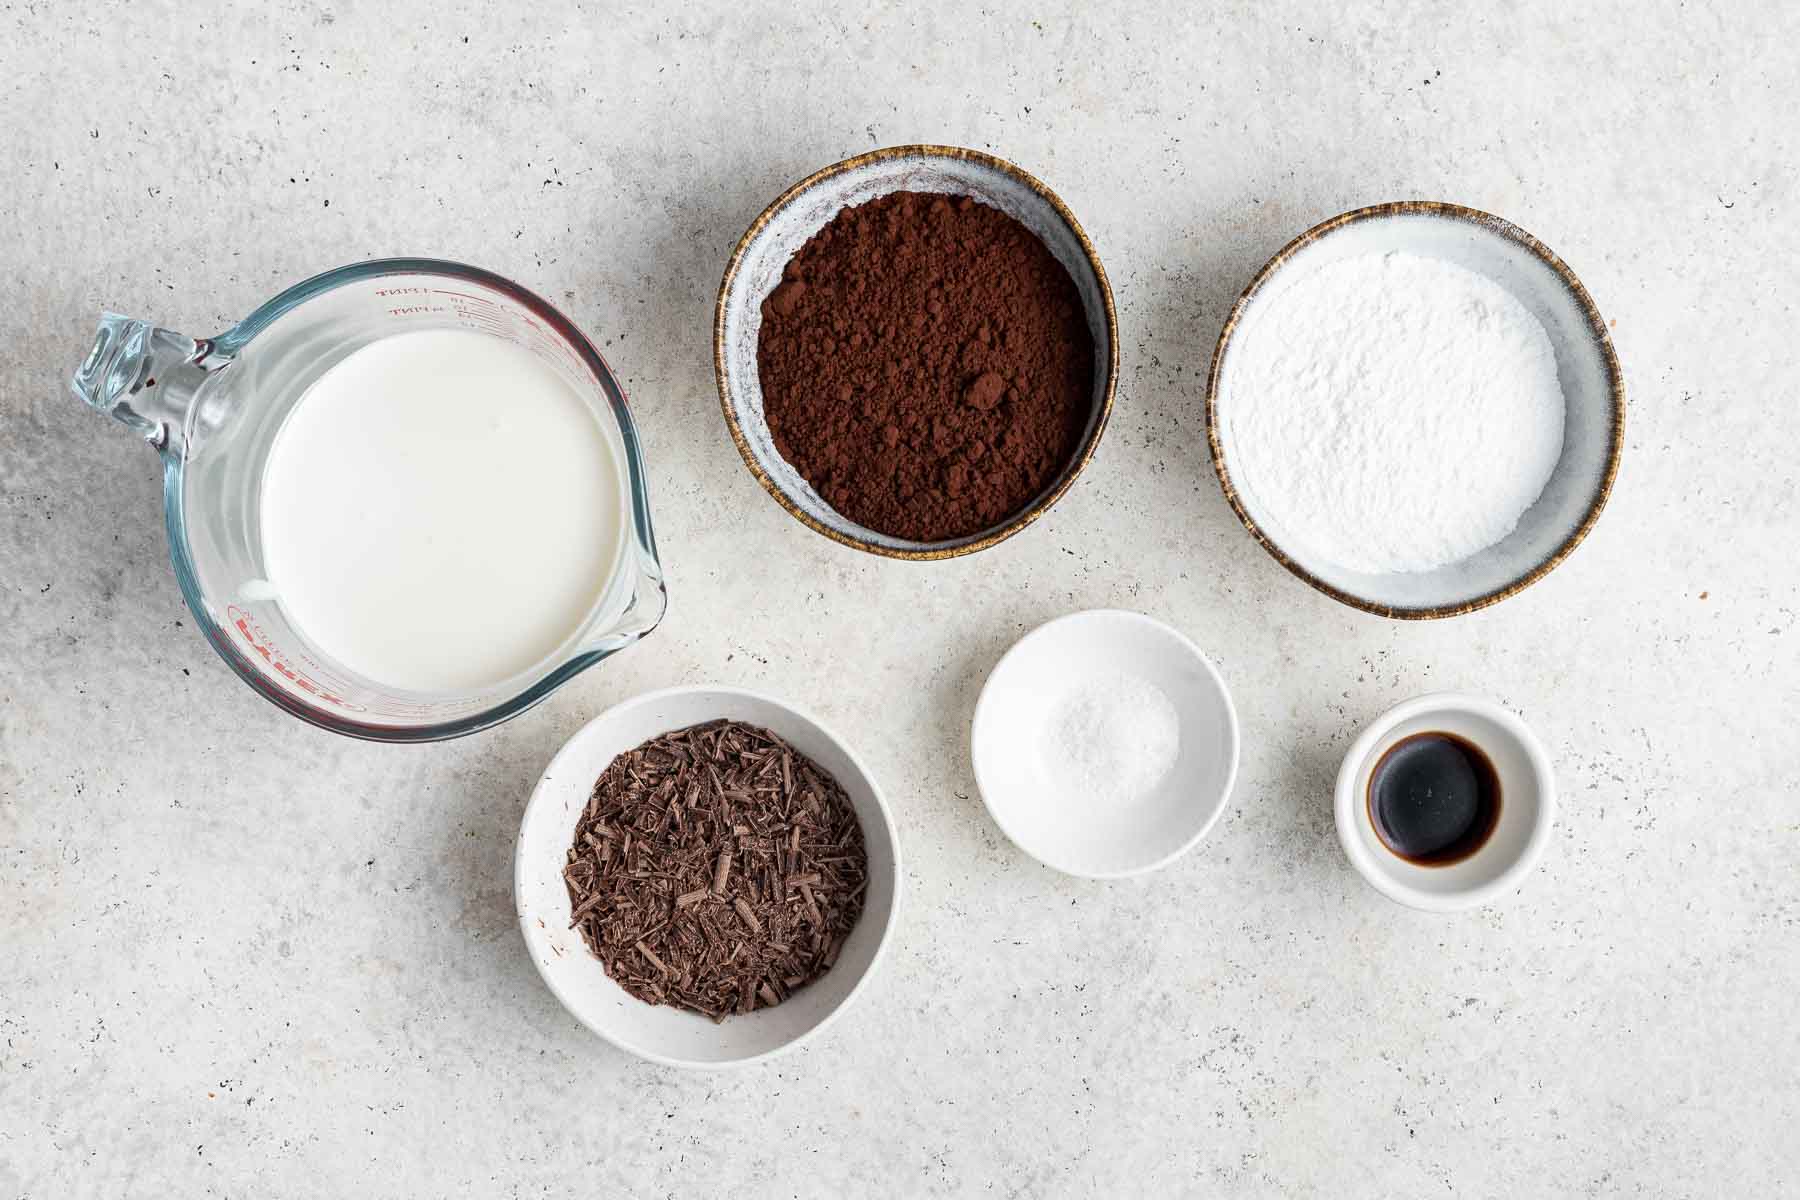 Ingredients for chocolate whipped cream in small bowls on marble counter.